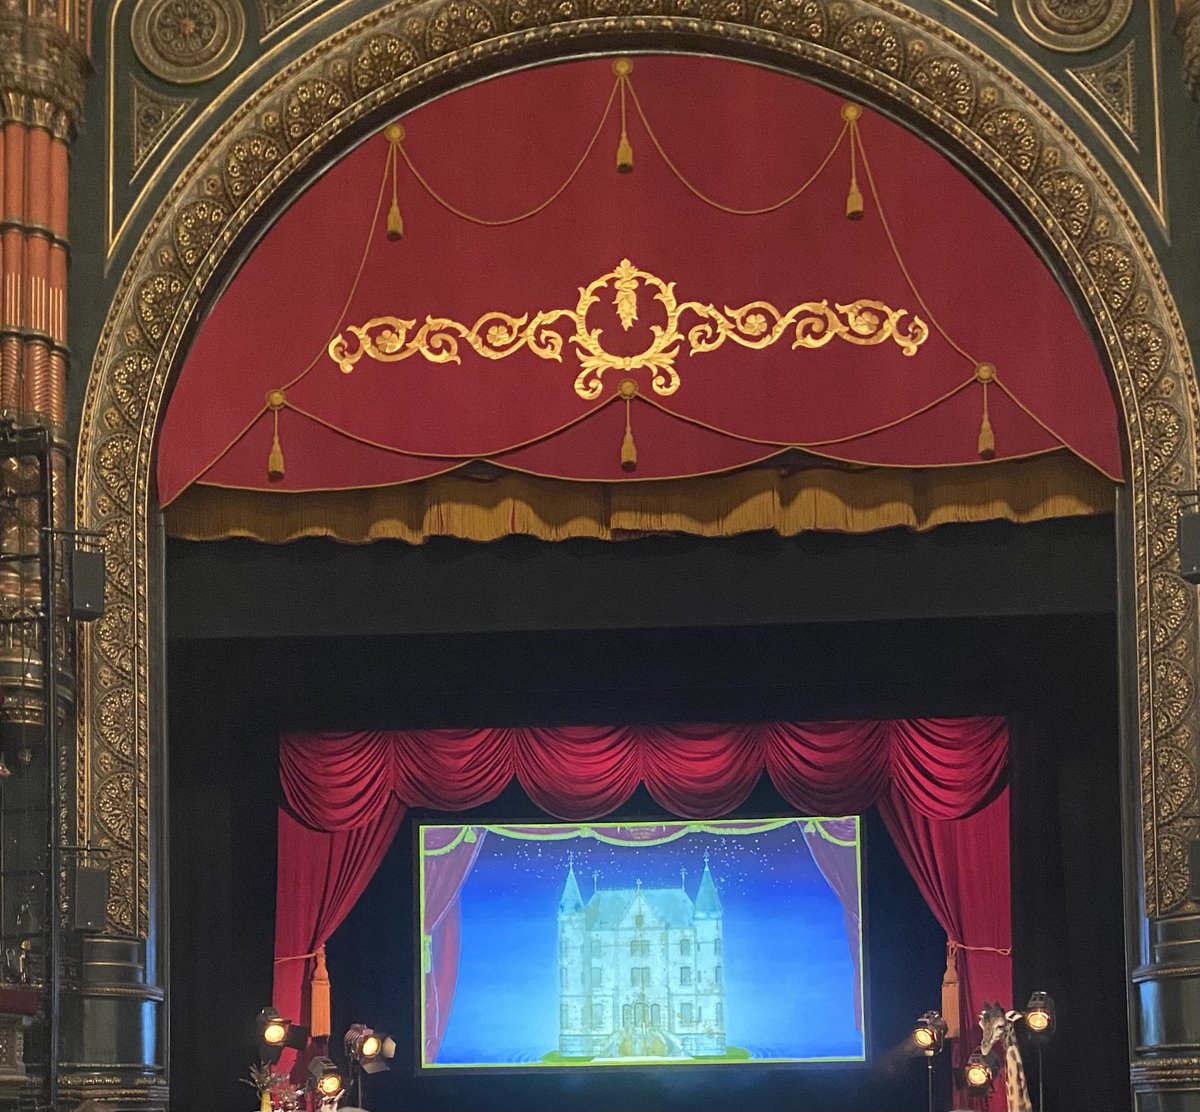 Another fab evening learning all about life at the château and their lives @leedsgrandtheatre last night! Thank you ⁦@dickstrawbridge⁩ , always entertaining!. See you again soon I hope #escapetothechateau